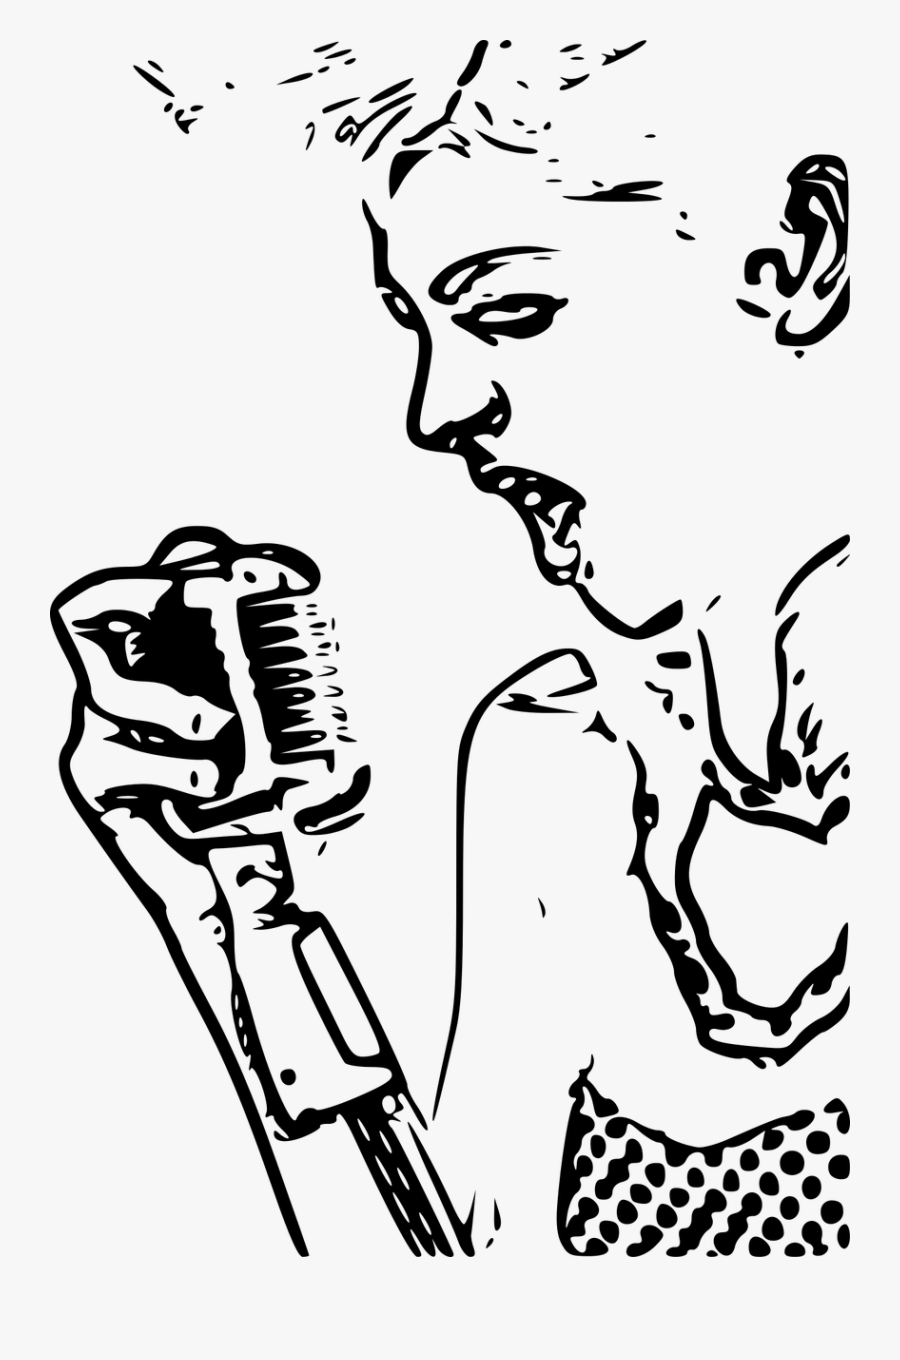 Microphone Karaoke Singing Drawing Karaoke Singer Clip Art Free Transparent Clipart Clipartkey See more ideas about singing drawing, drawings, microphone drawing. microphone karaoke singing drawing